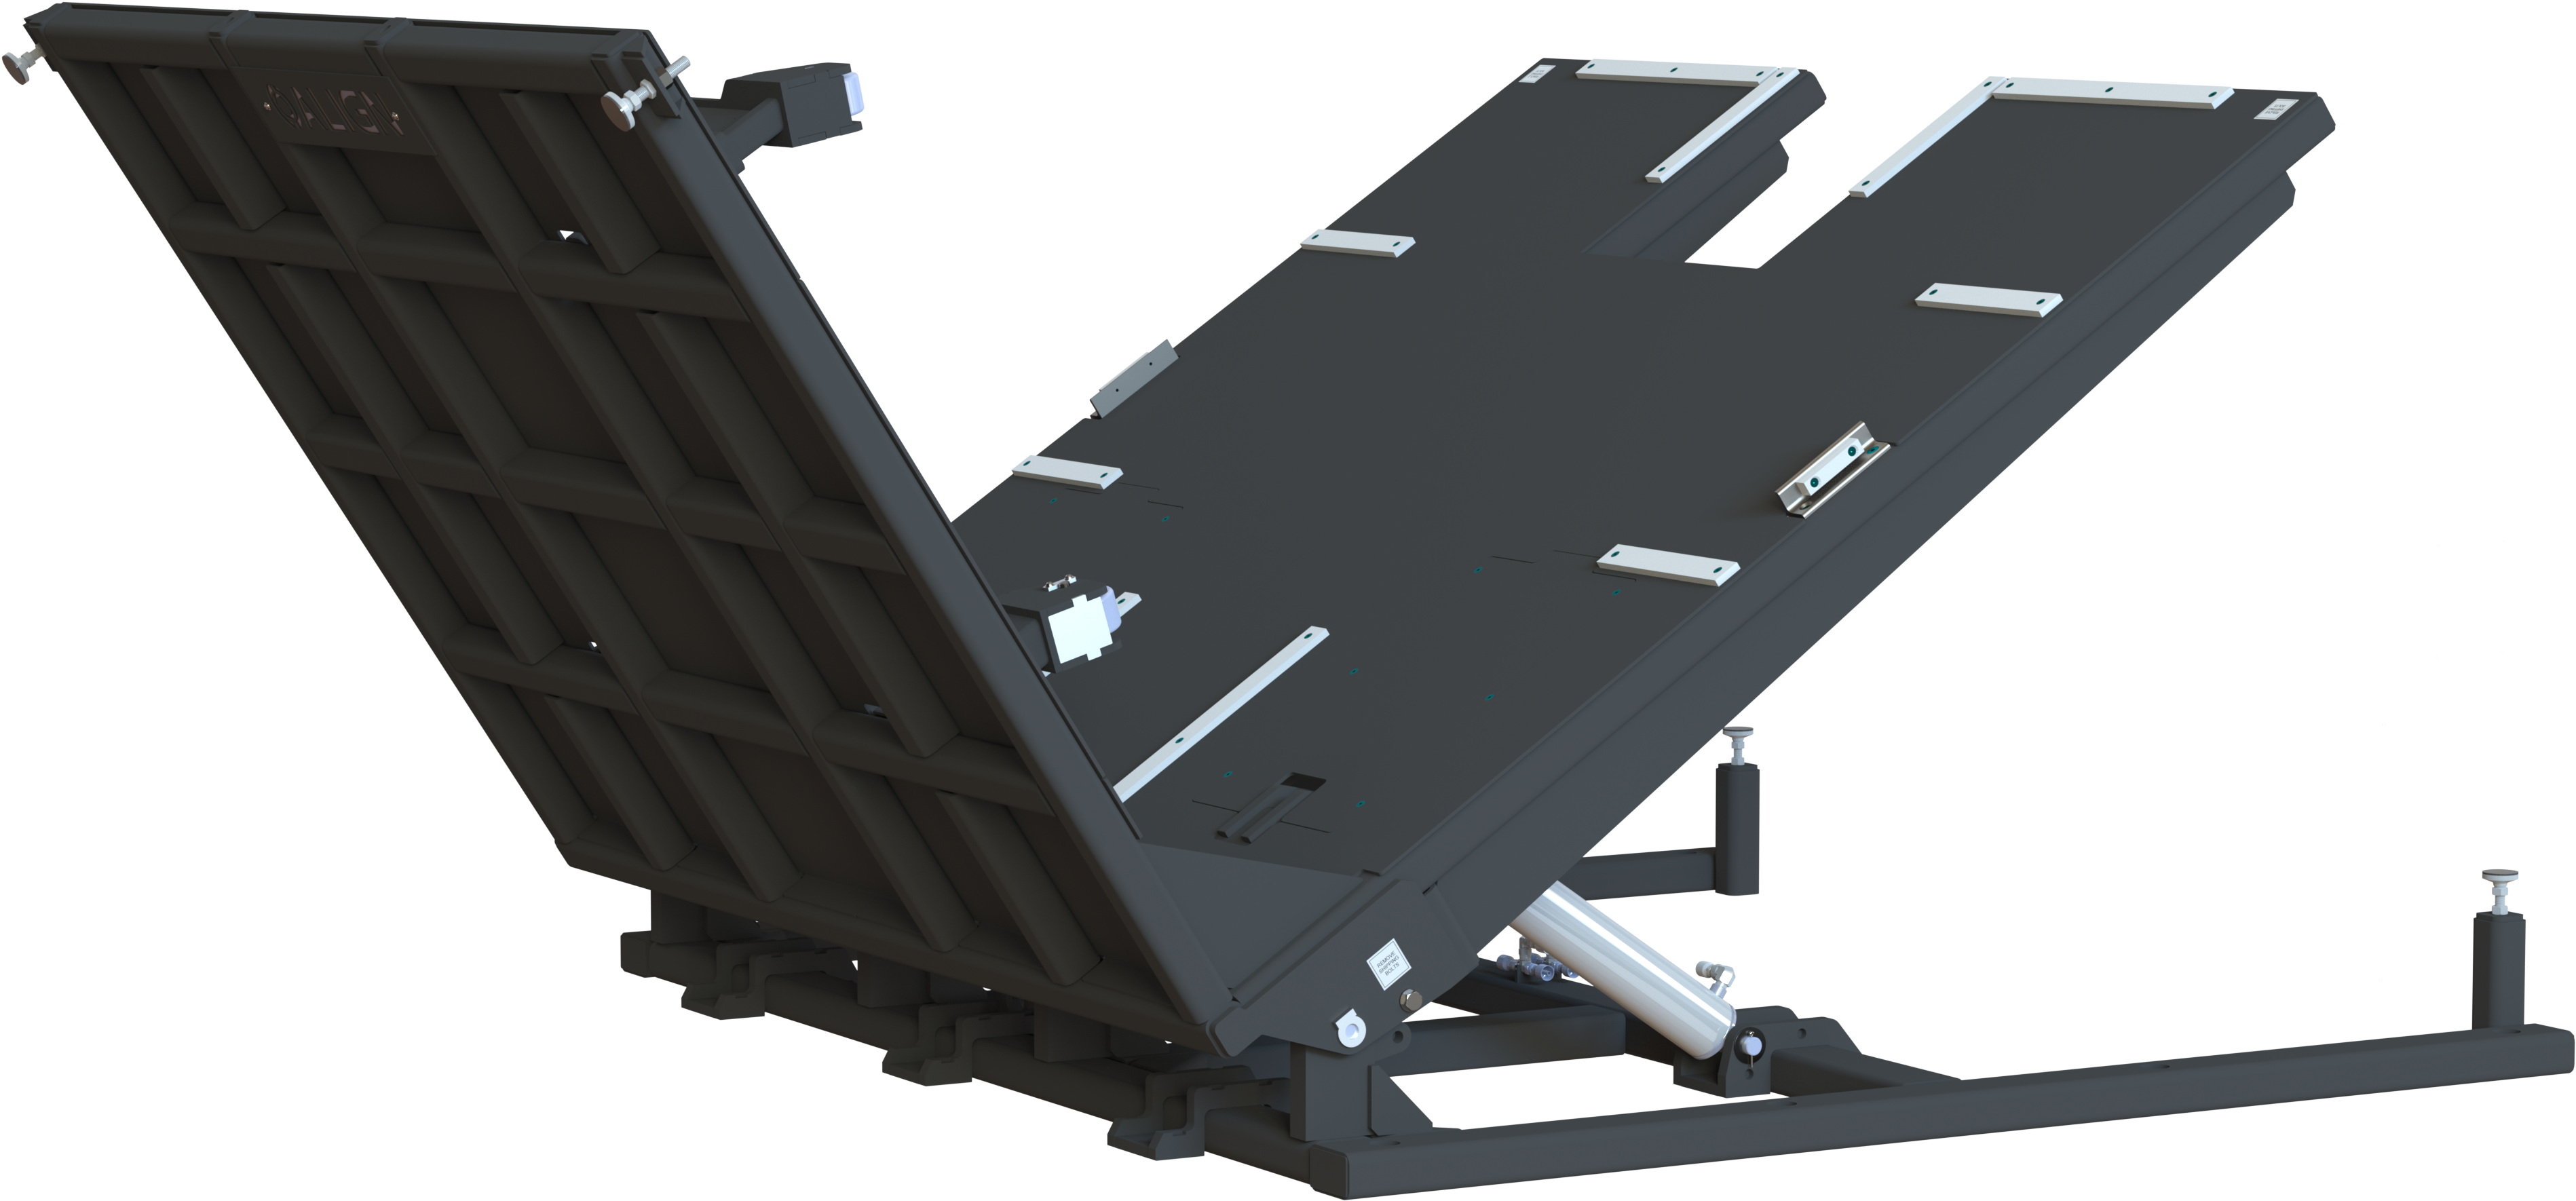 A Black Lift Table With A Black Background